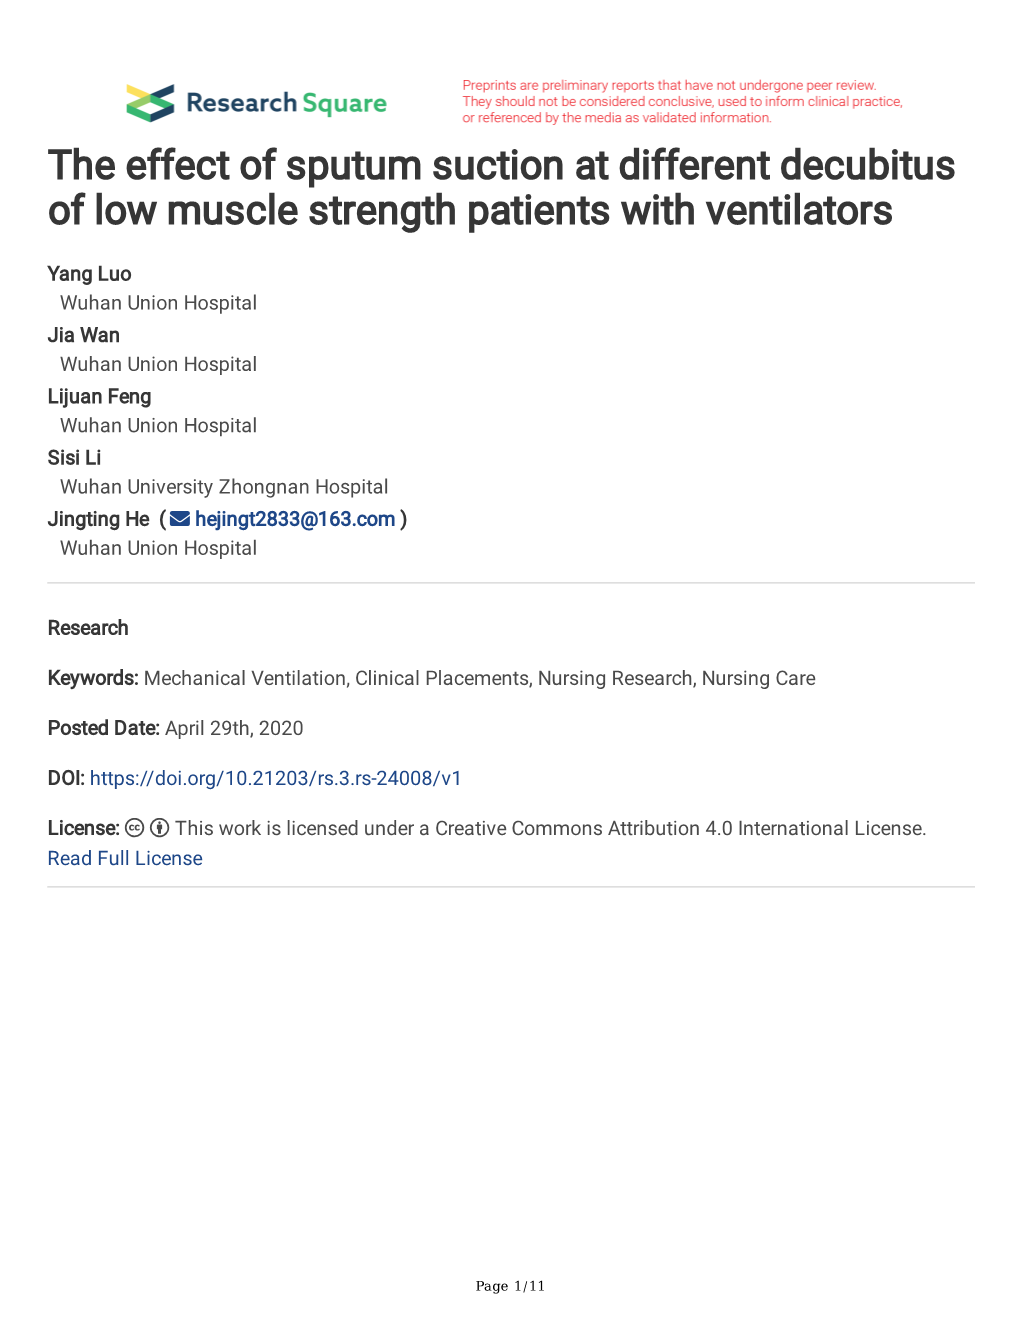 The Effect of Sputum Suction at Different Decubitus of Low Muscle Strength Patients with Ventilators